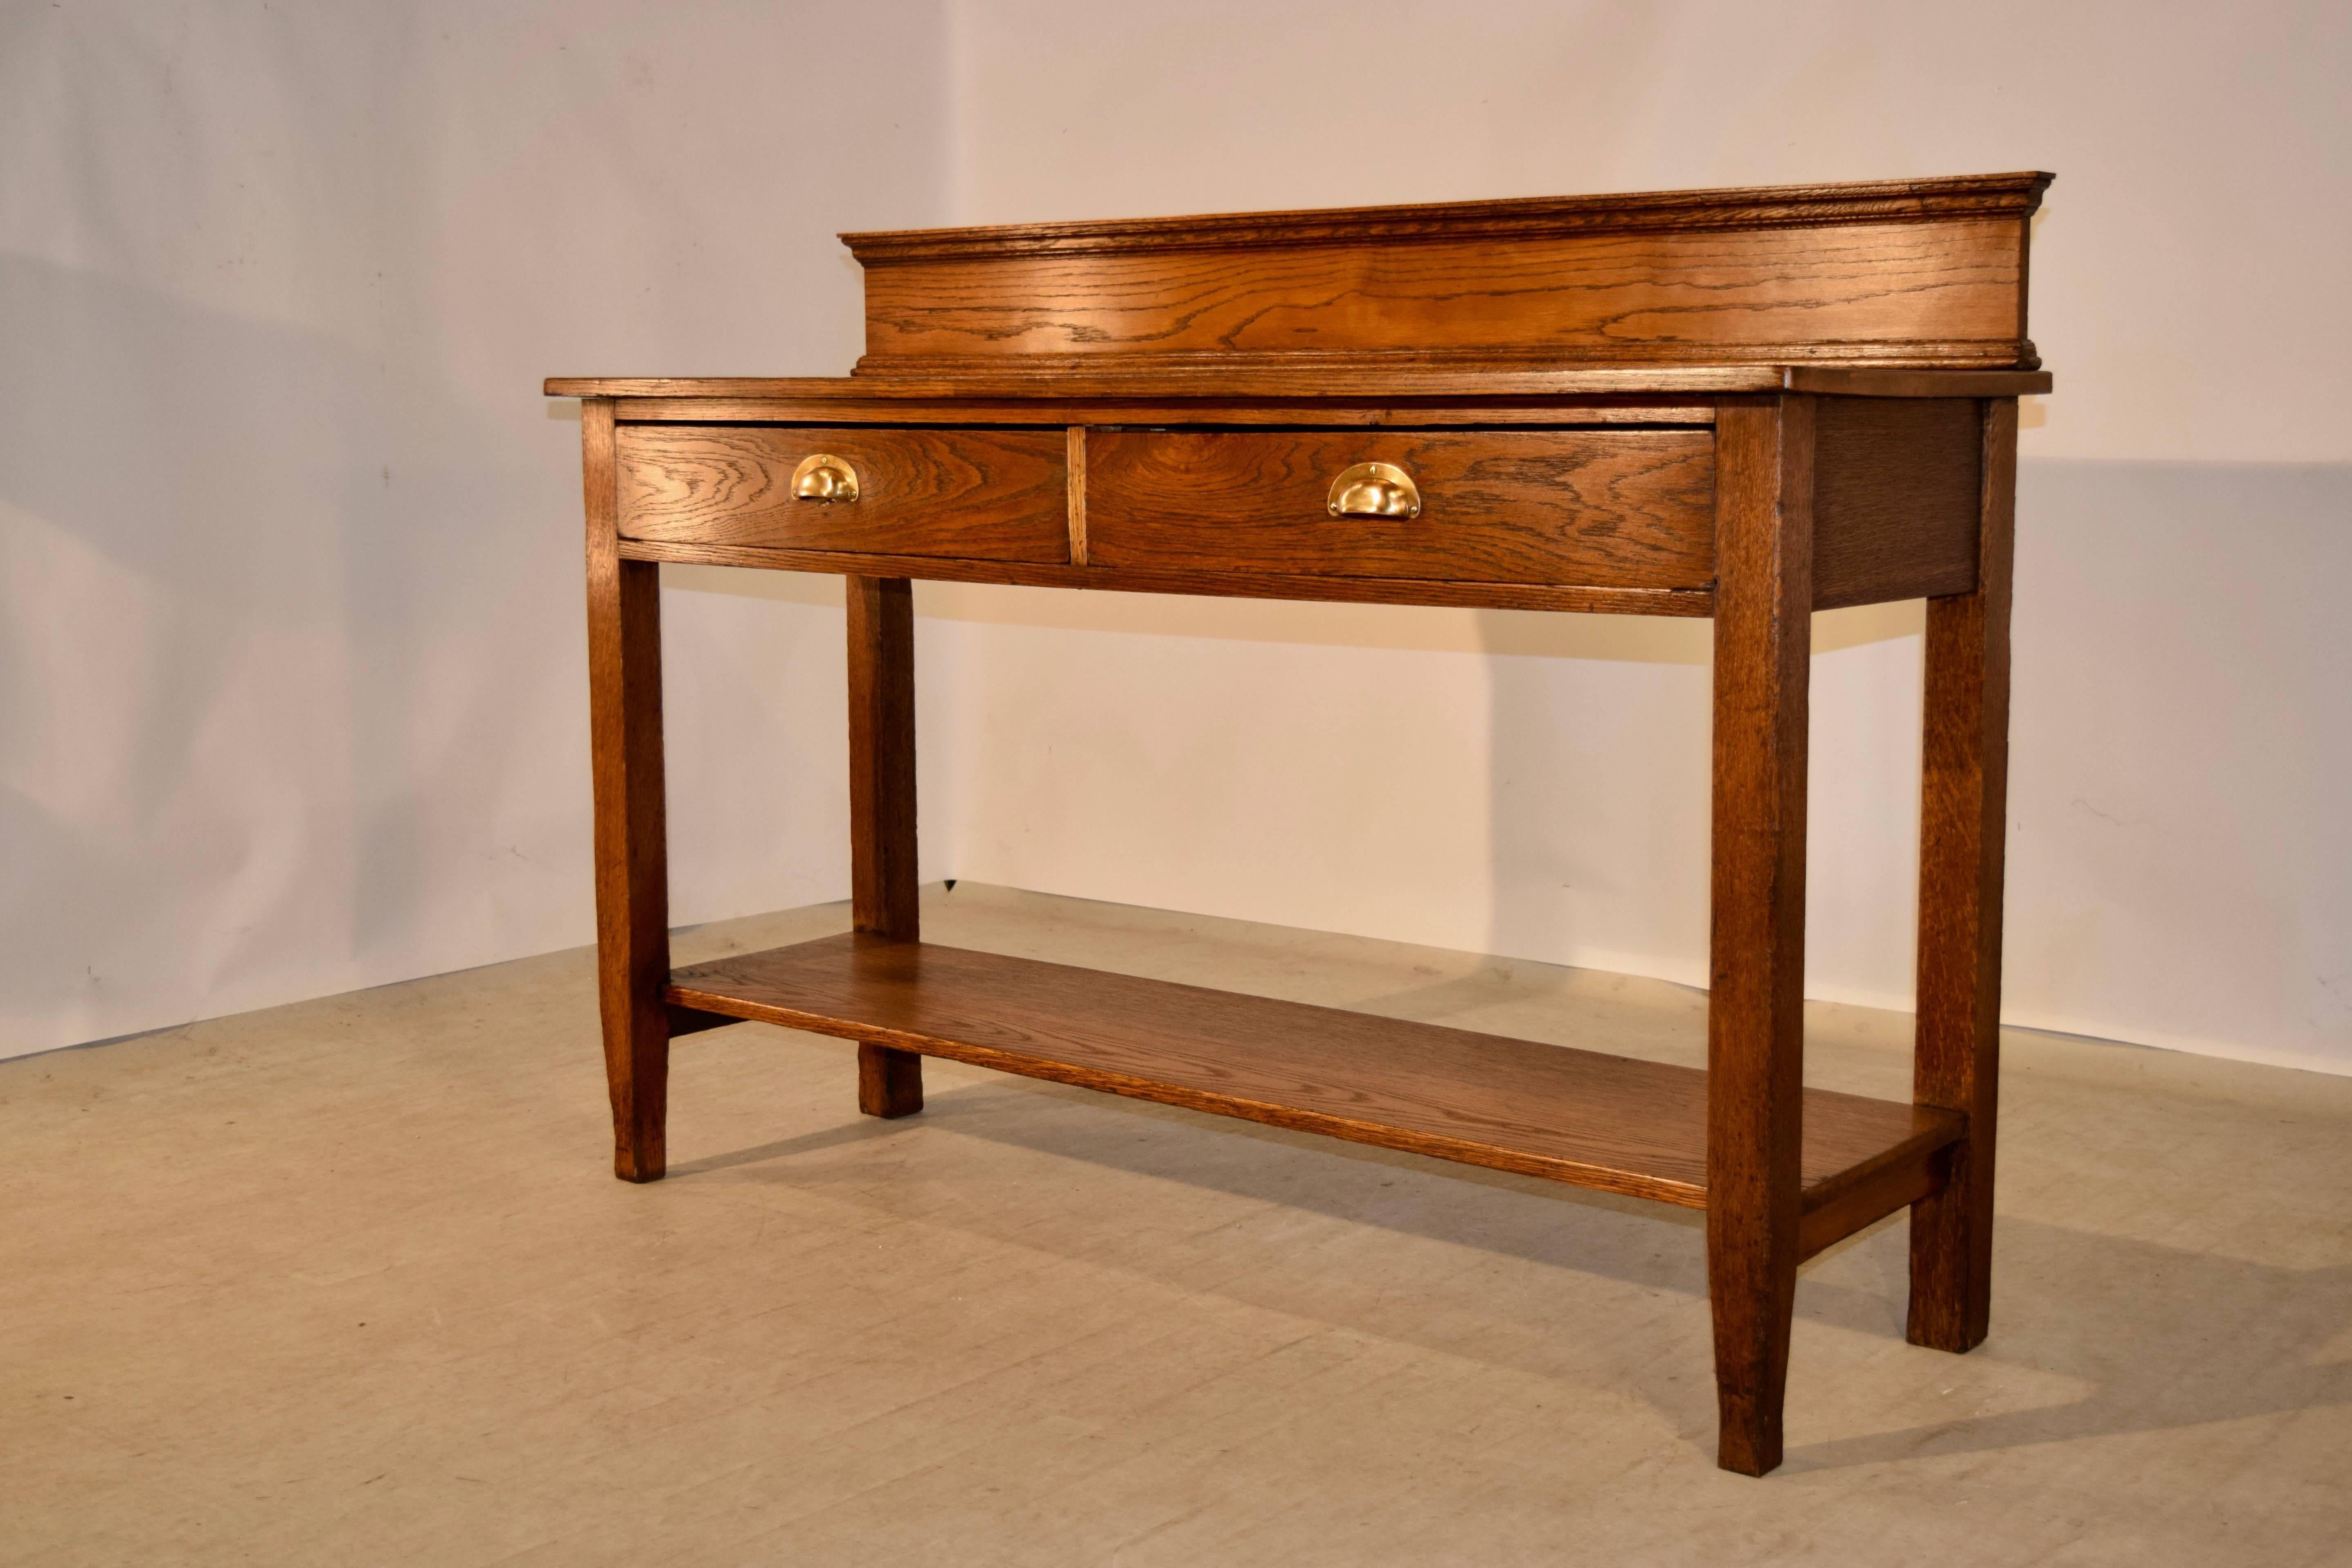 19th century simple oak server from England. There is a backsplash with molded decorated edges following down to a simplistic server with two drawers and tapered legs, which are joined by a lower shelf. Measure: The serving height is 35.88 inches.